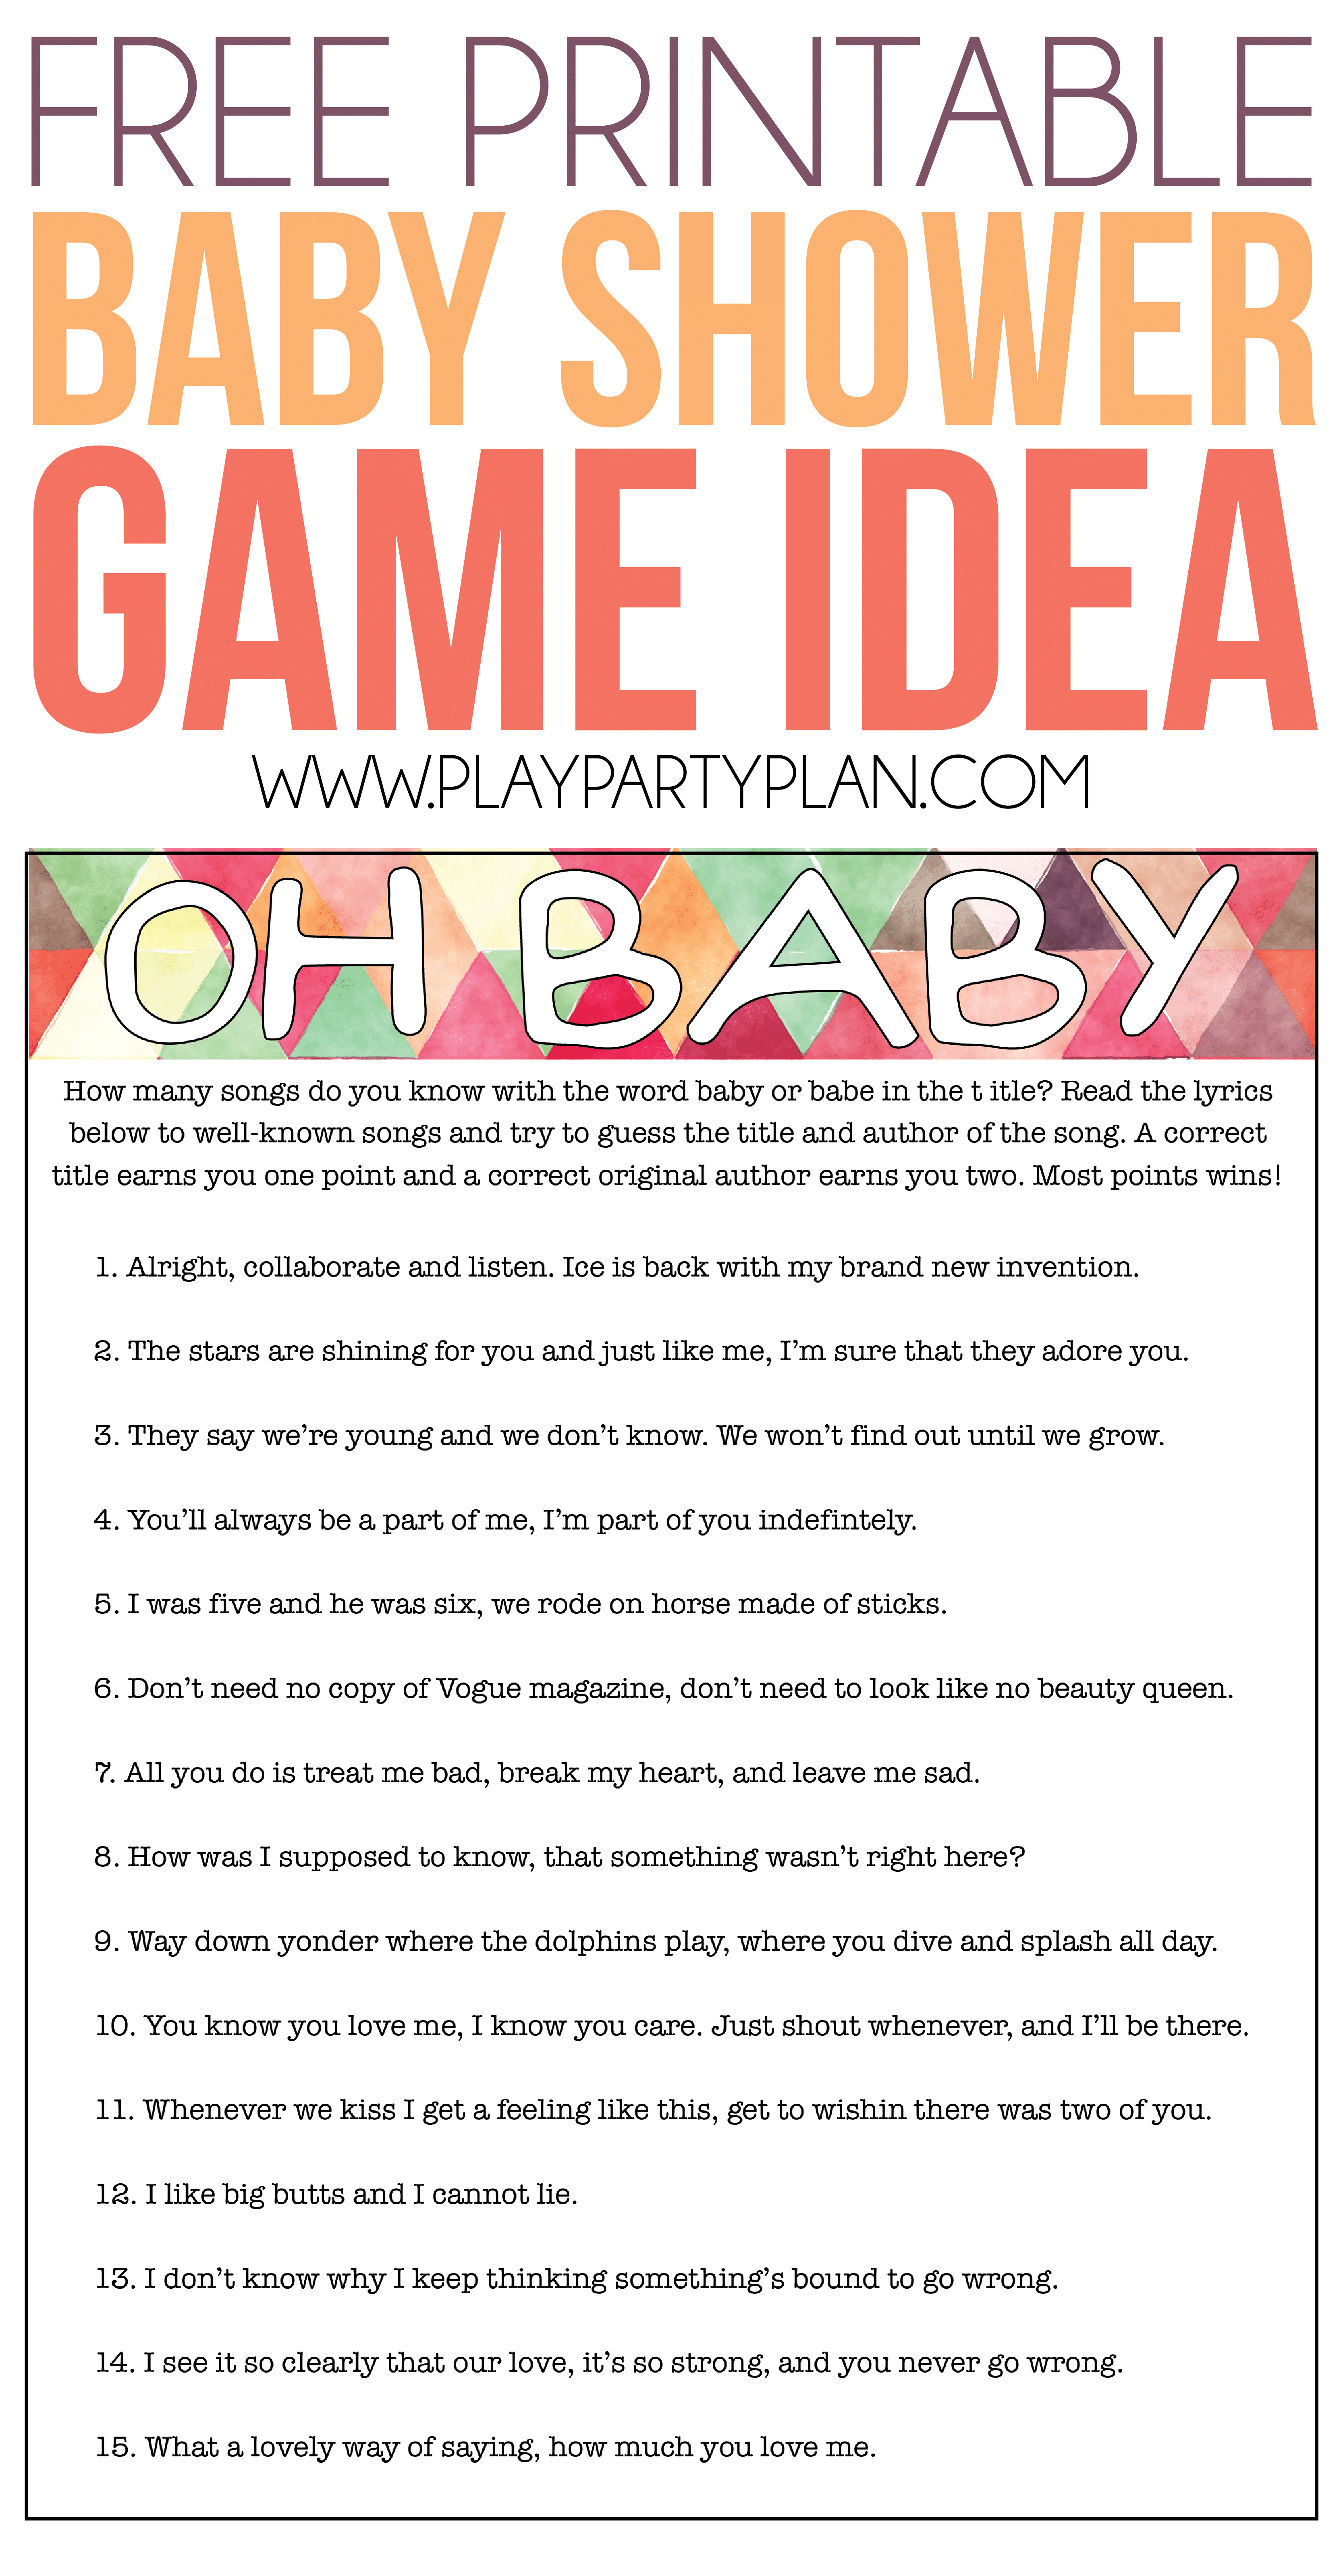 Oh Baby! Free Printable Baby Shower Game Expecting Moms Will Love - Free Printable Baby Shower Games For Large Groups